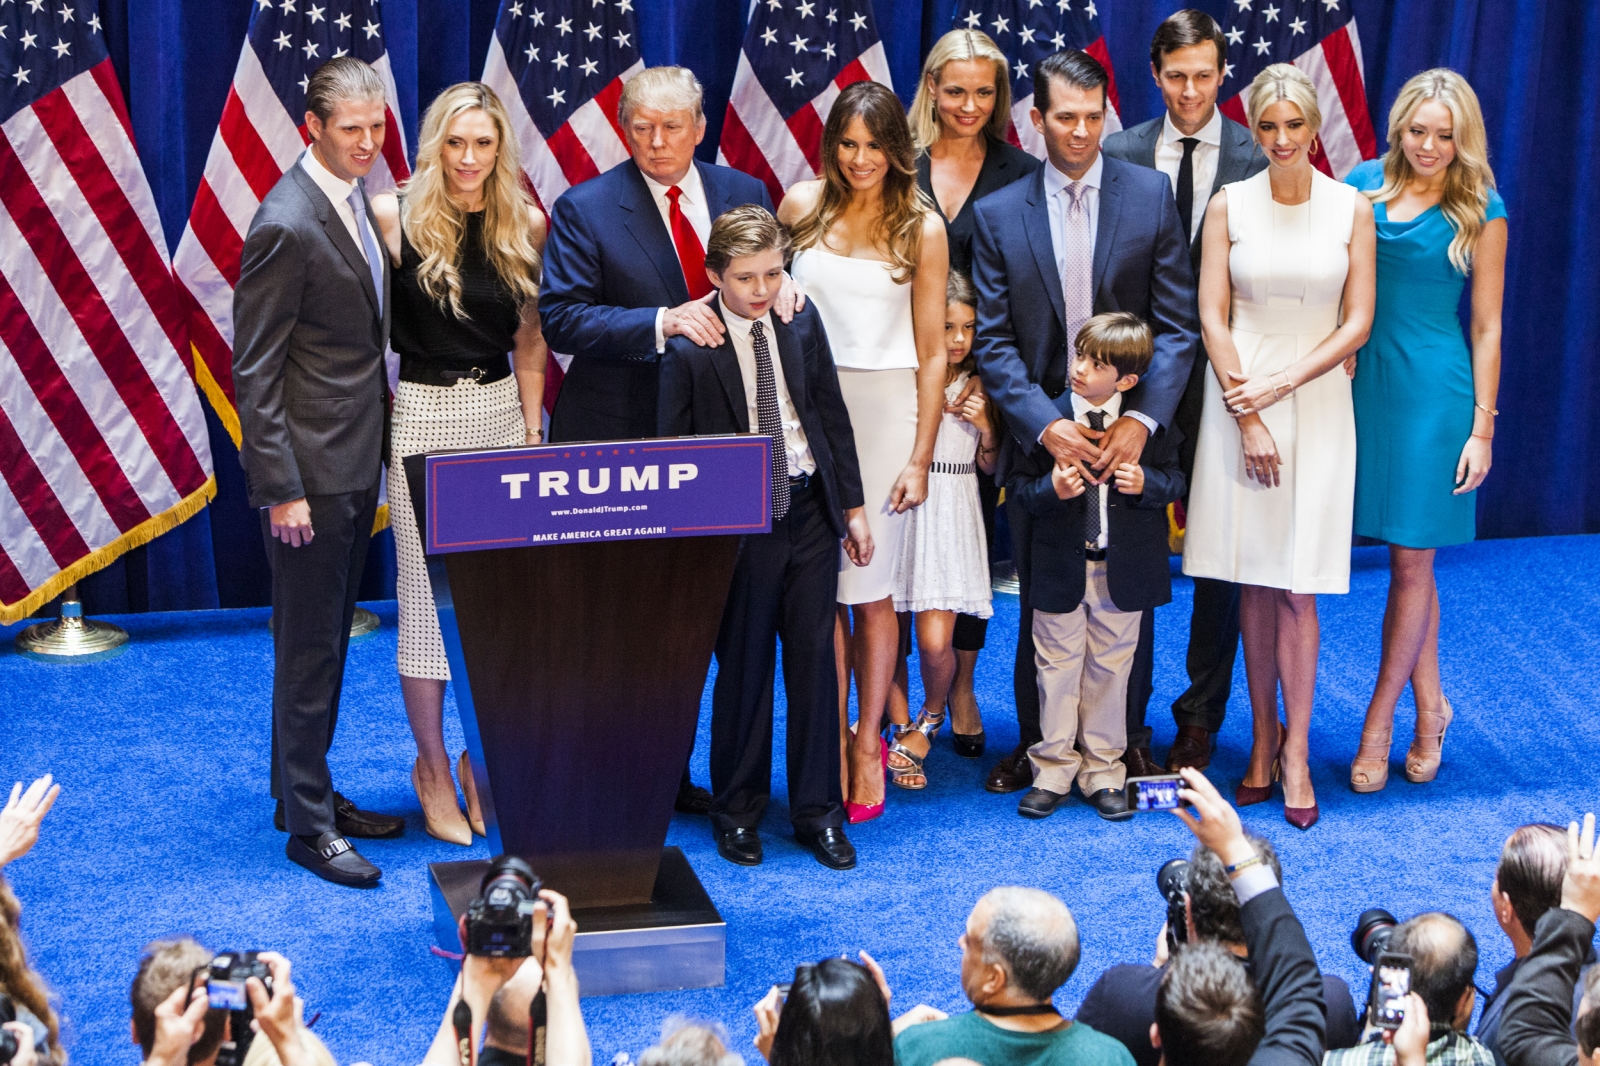 Donald Trump's children are not their father - so stop bullying them